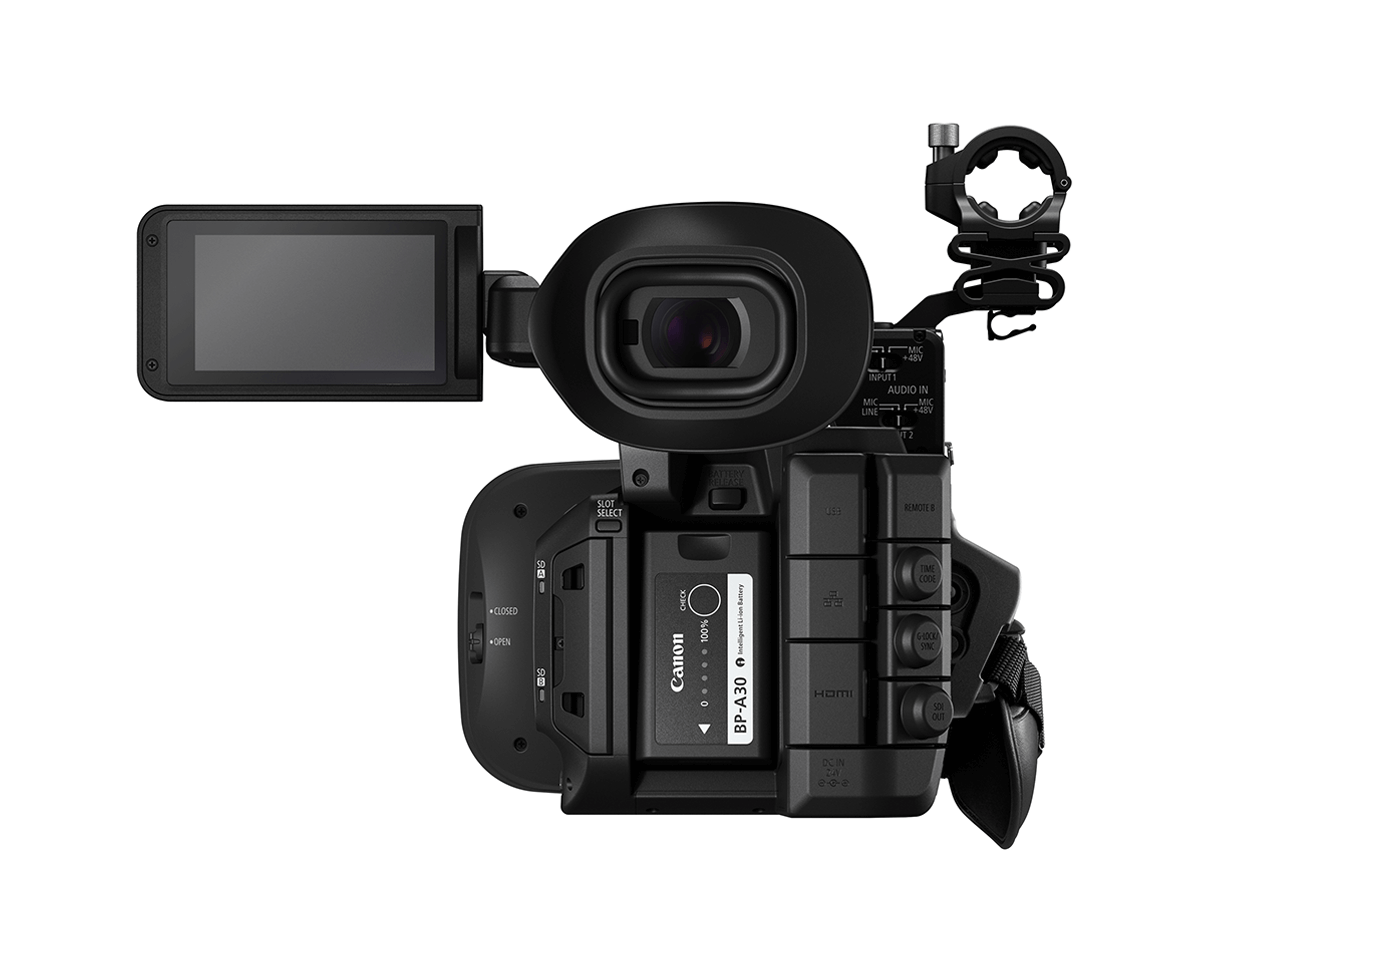 Back profile image of the XF605 video camera